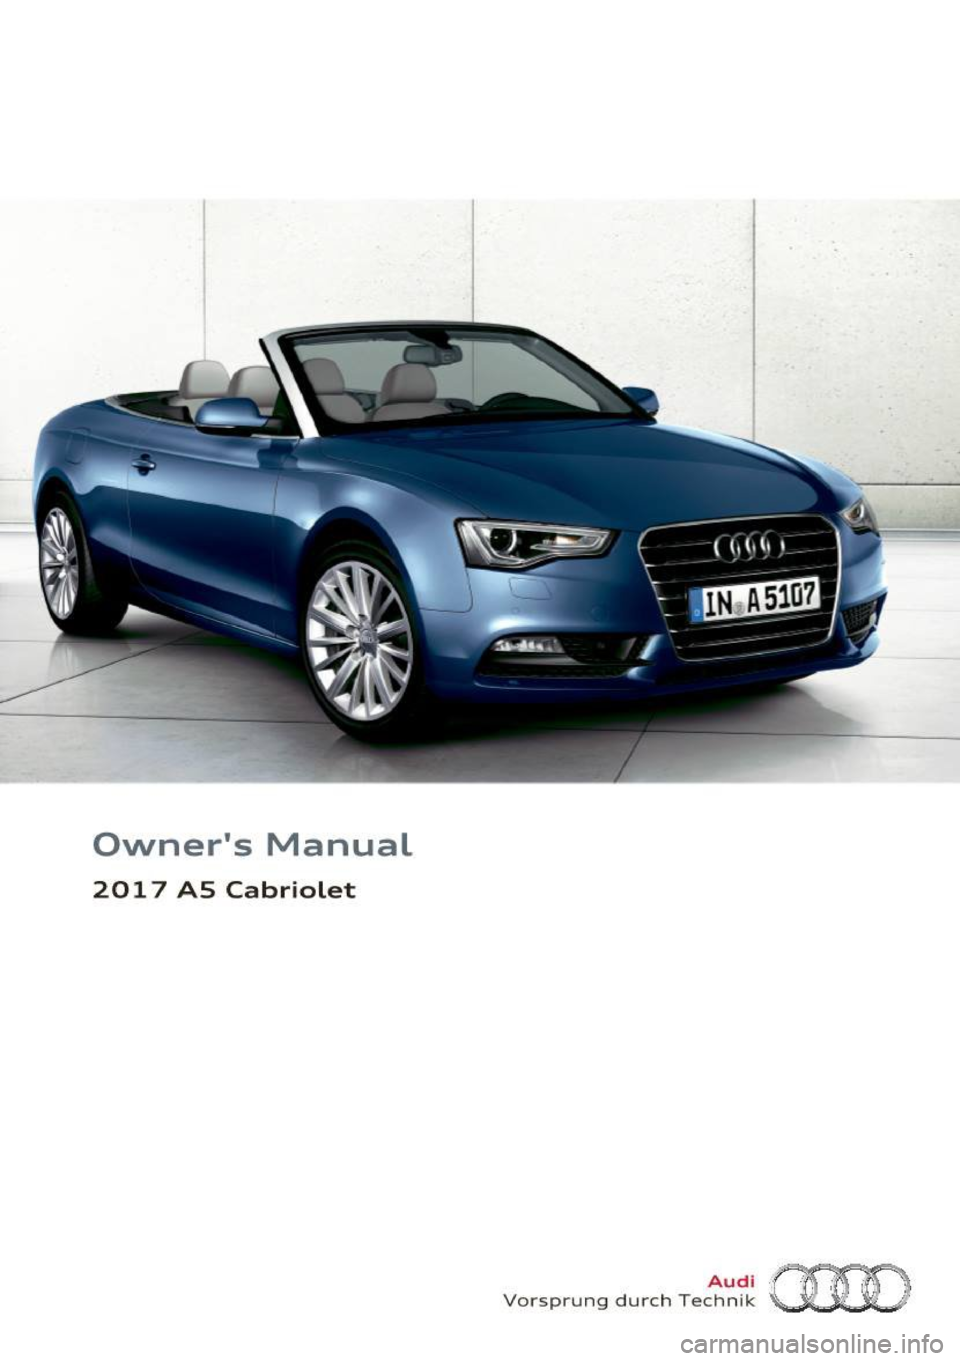 AUDI A5 CABRIOLET 2017  Owners Manual 